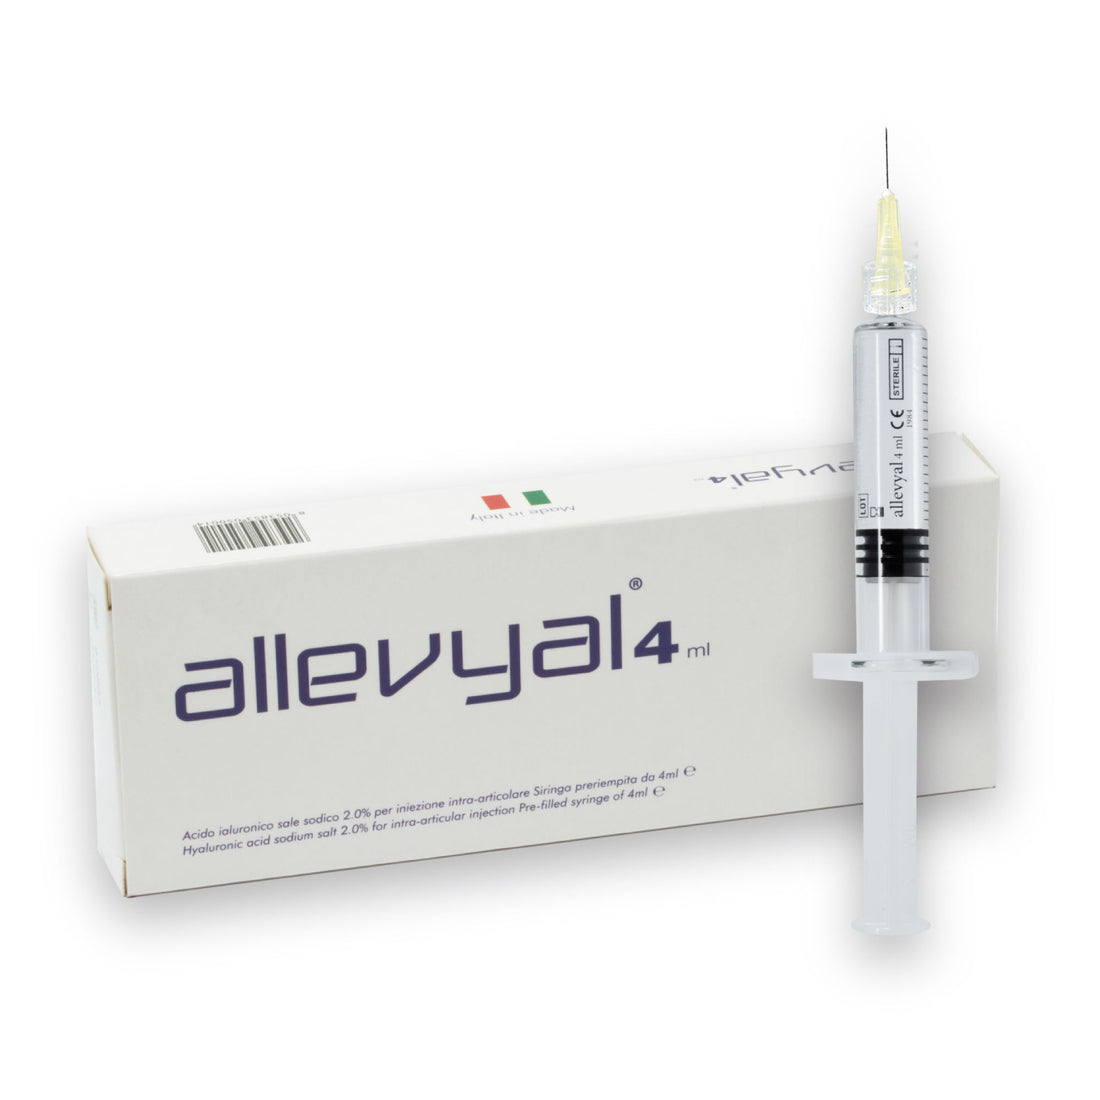 ALLEVYAL 4 ML - Hyaluronic Acid with High Viscosity Degree for Joints affected by OA